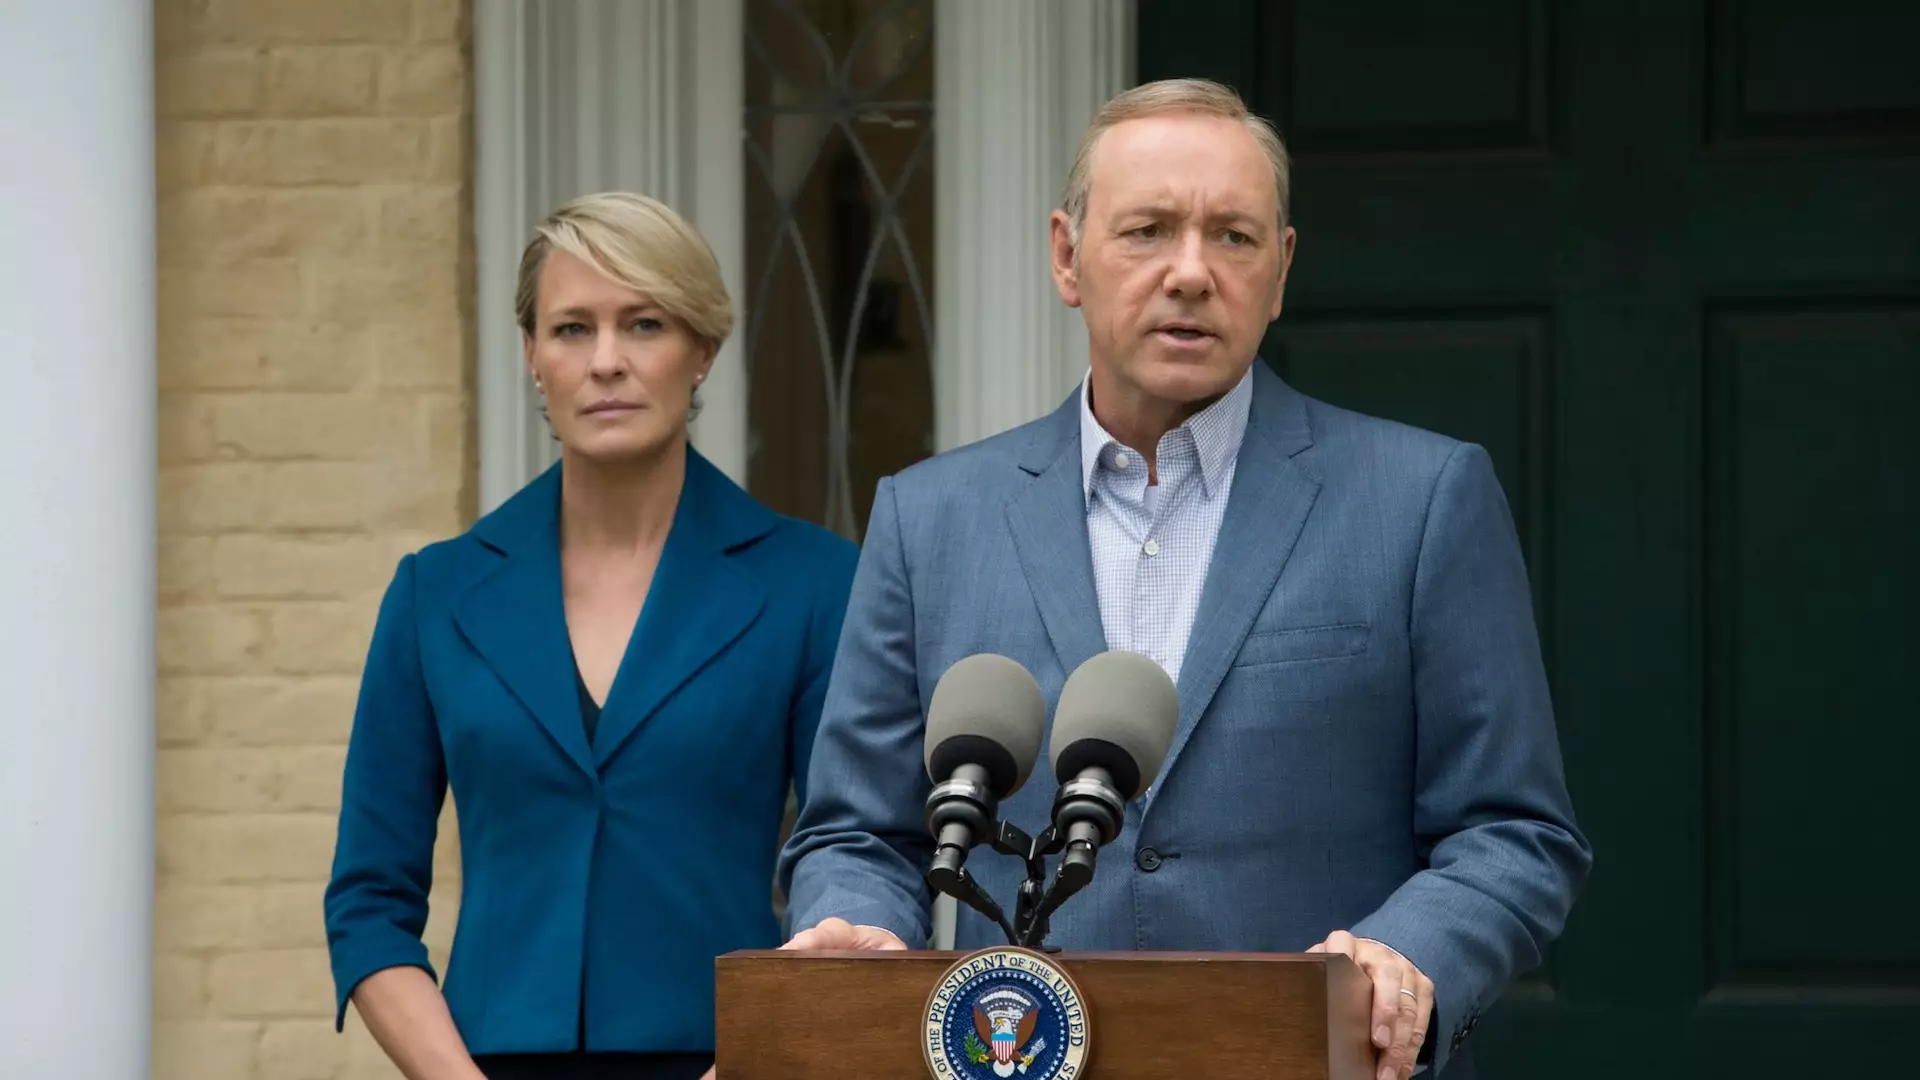 The Next Season Of 'House Of Cards' Will Be The Last